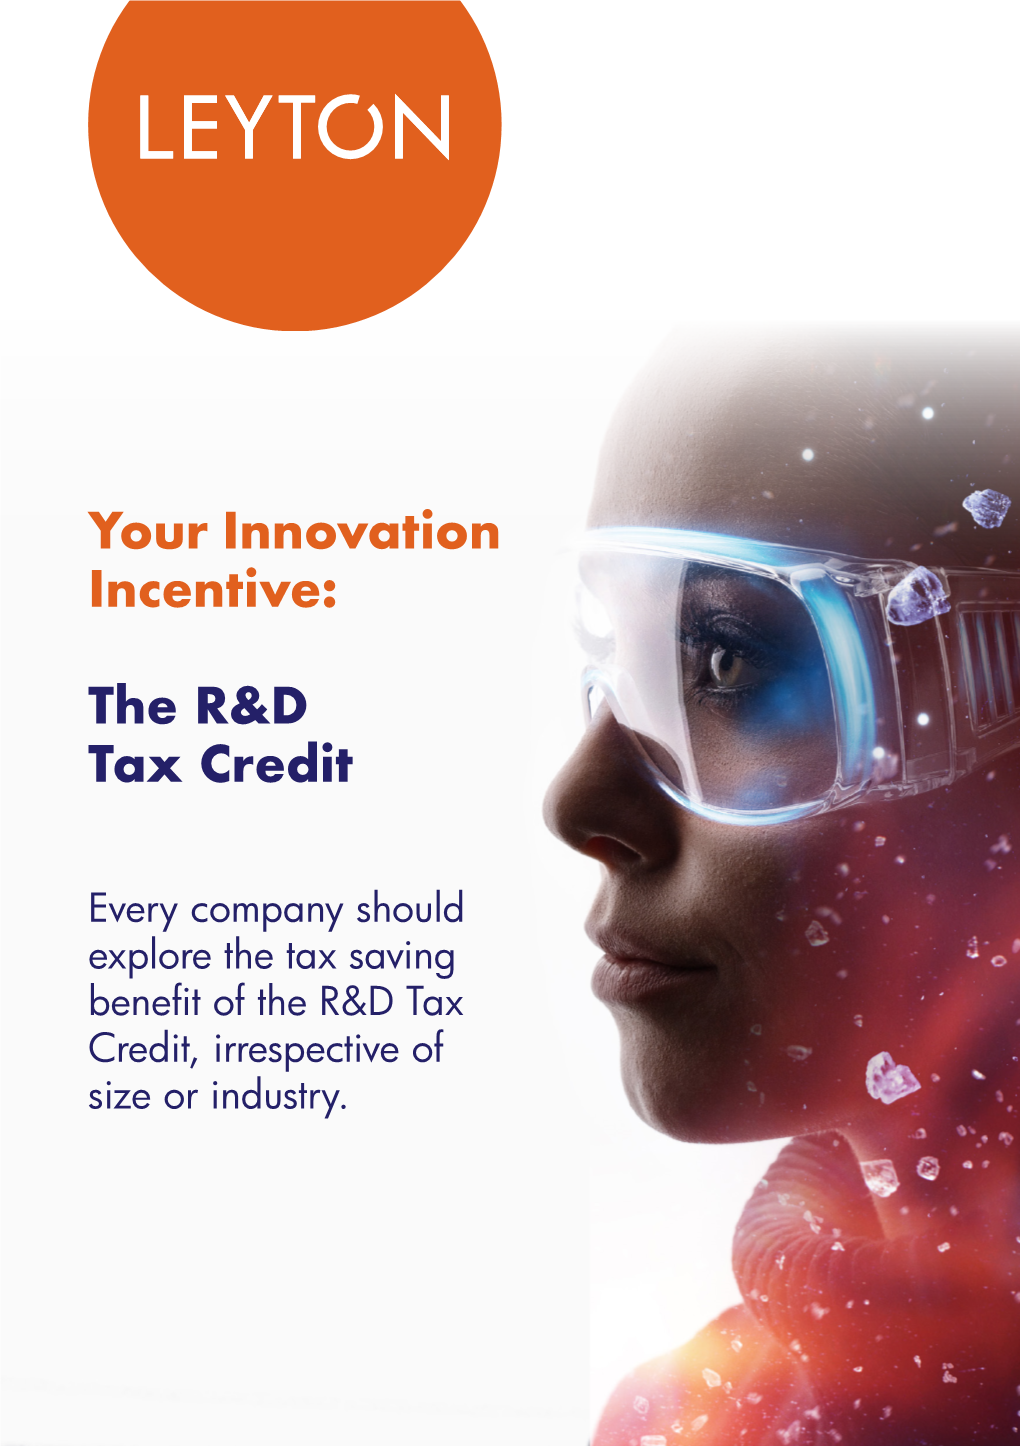 Your Innovation Incentive: the R&D Tax Credit